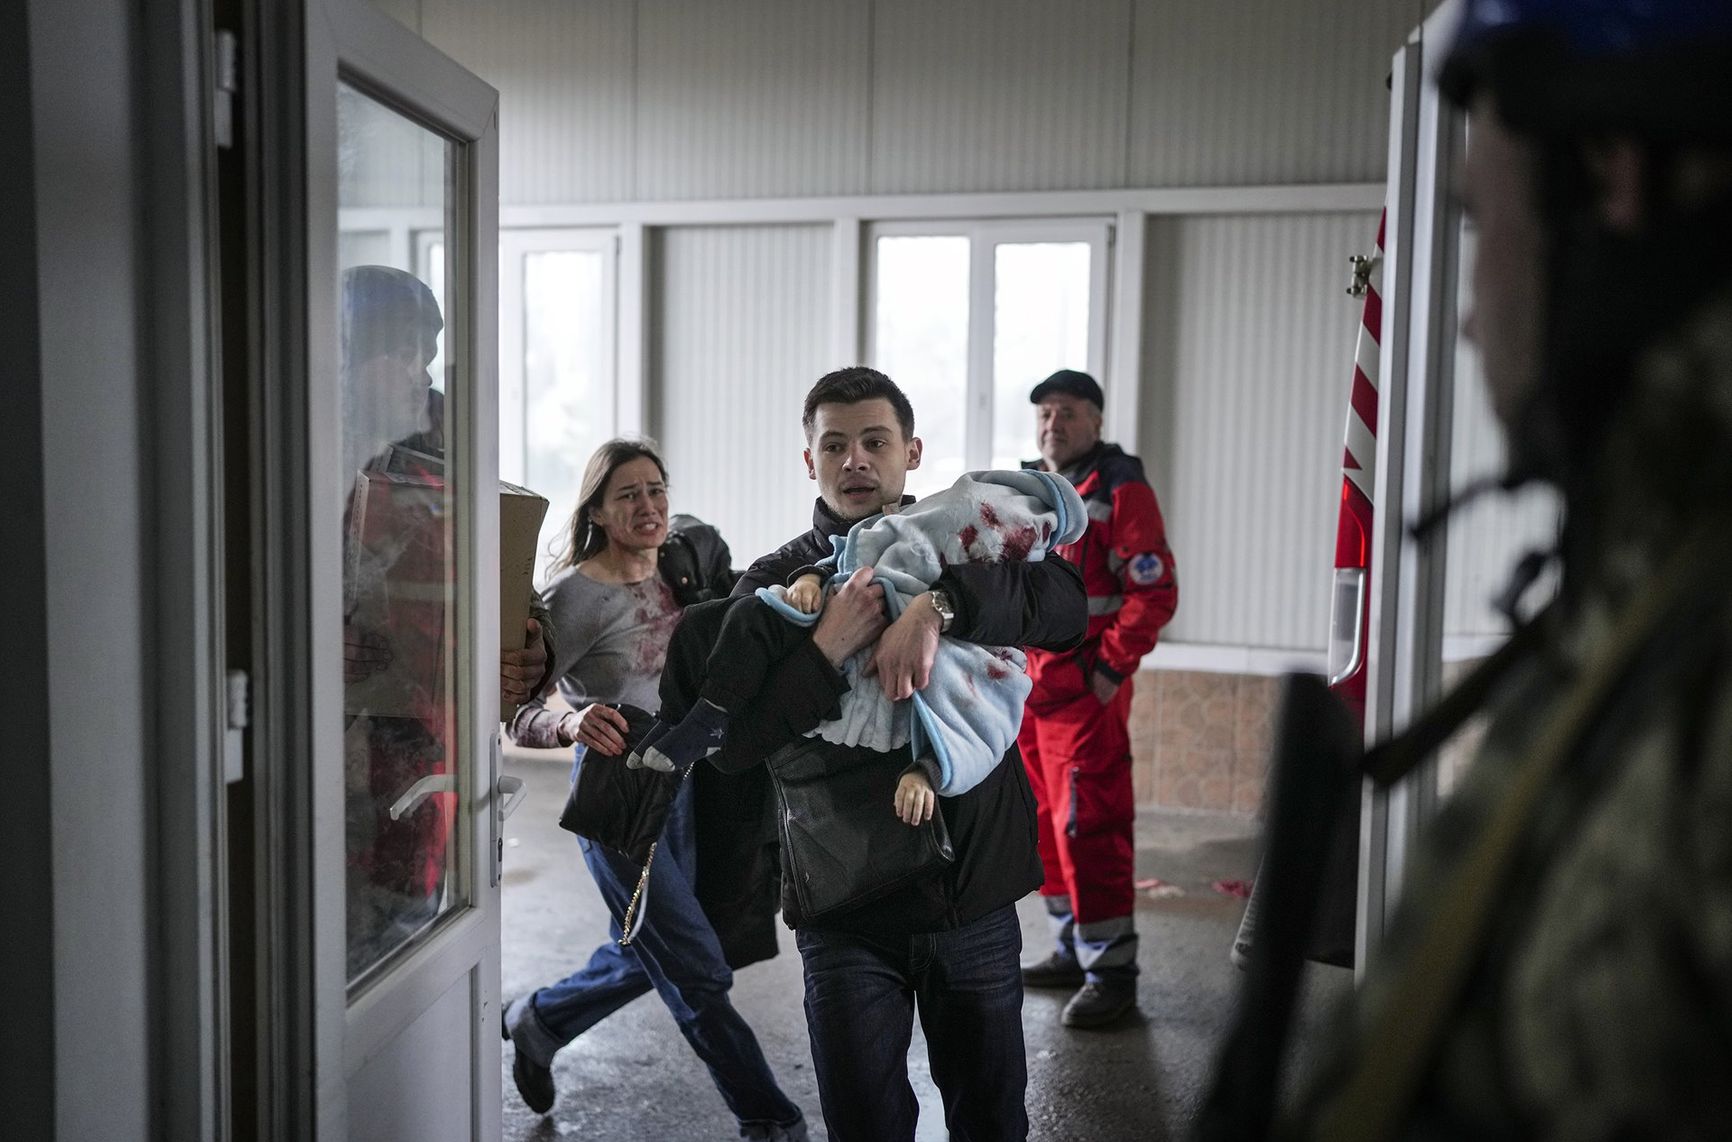 Marina Yatsko and her boyfriend Oleksandr Kulahin bring her 18-month-old son Kirill, fatally wounded during shelling, to a hospital in Mariupol, Ukraine.